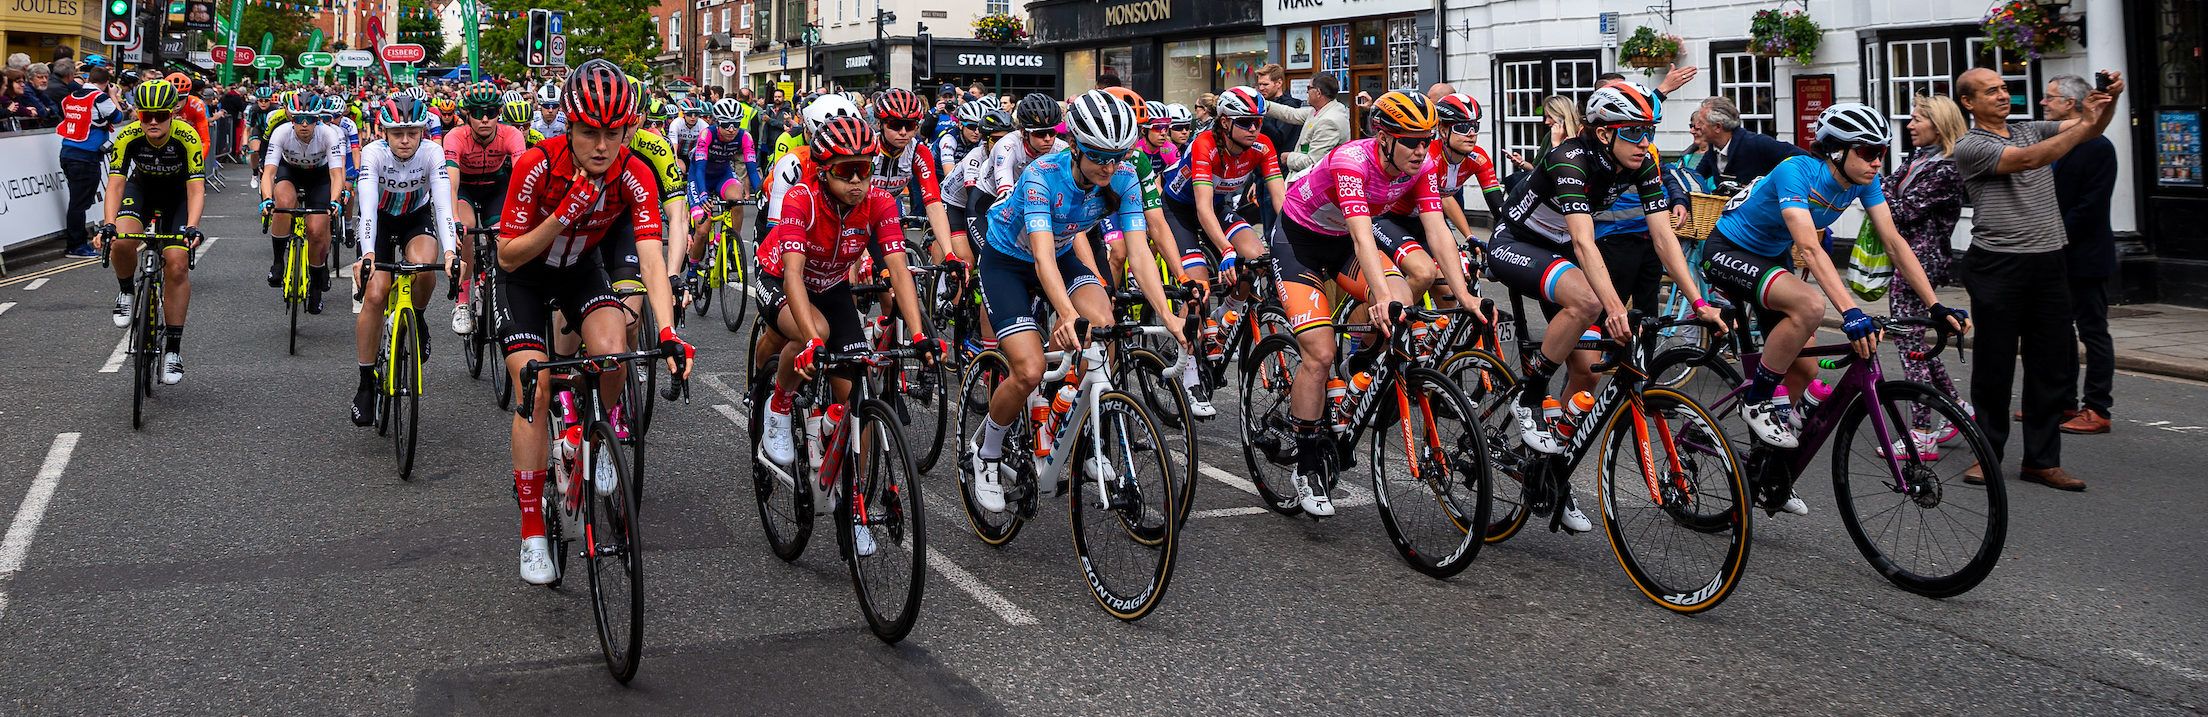 Race competitors cycle through Henley-on-Thames